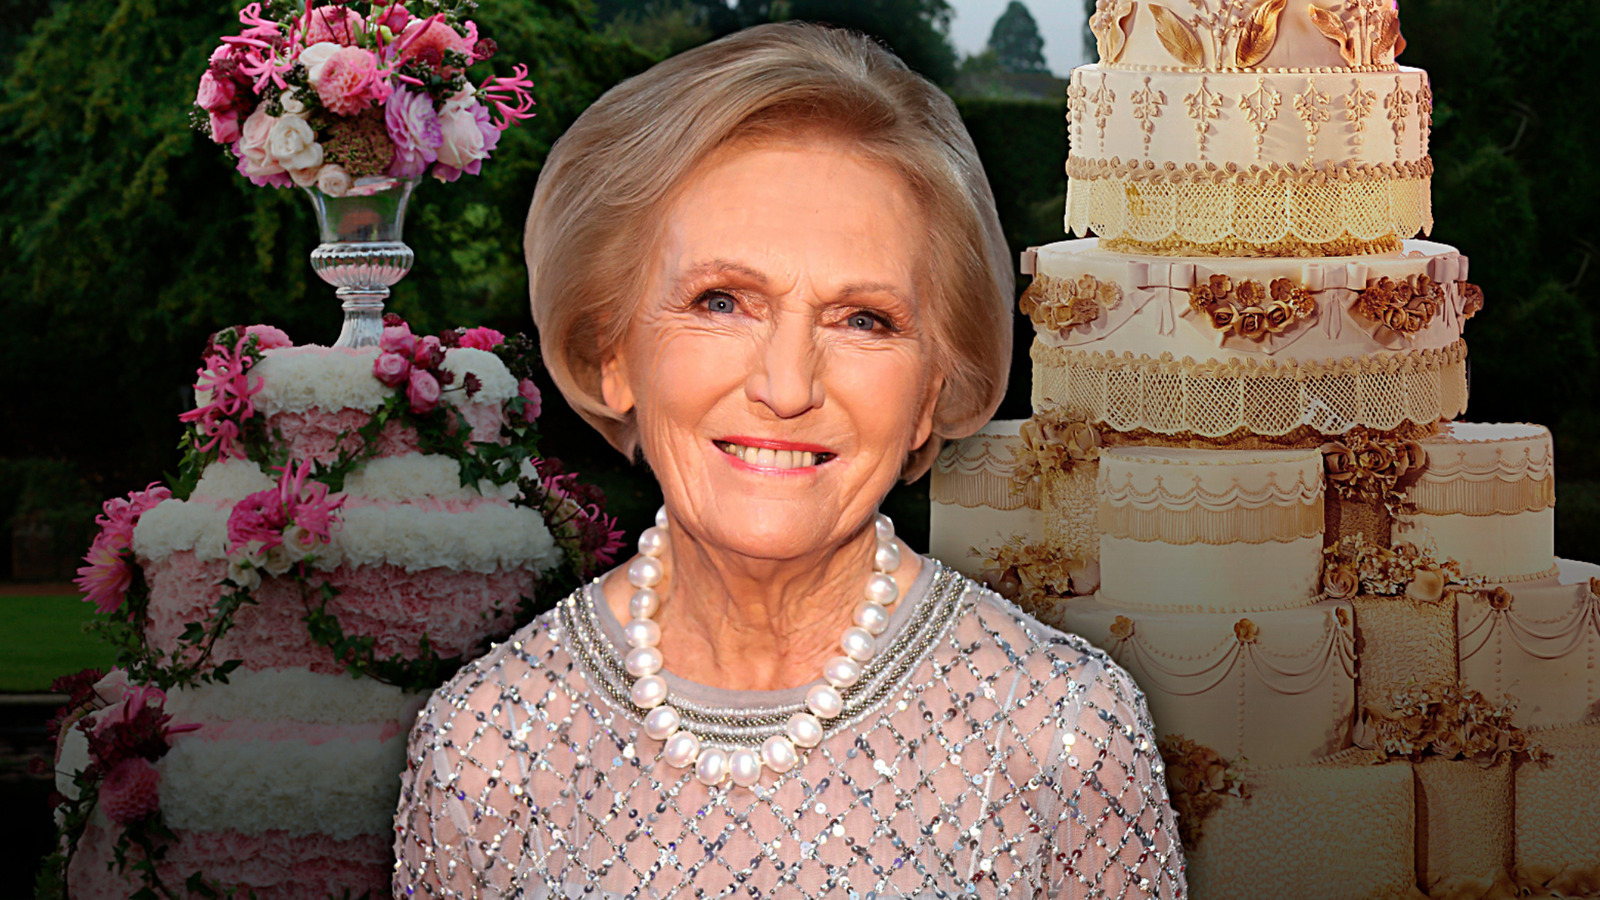 12 Mary Berry at the Oxford Union, Oxford, Britain - 07 Mar 2016 Stock  Pictures, Editorial Images and Stock Photos | Shutterstock Editorial